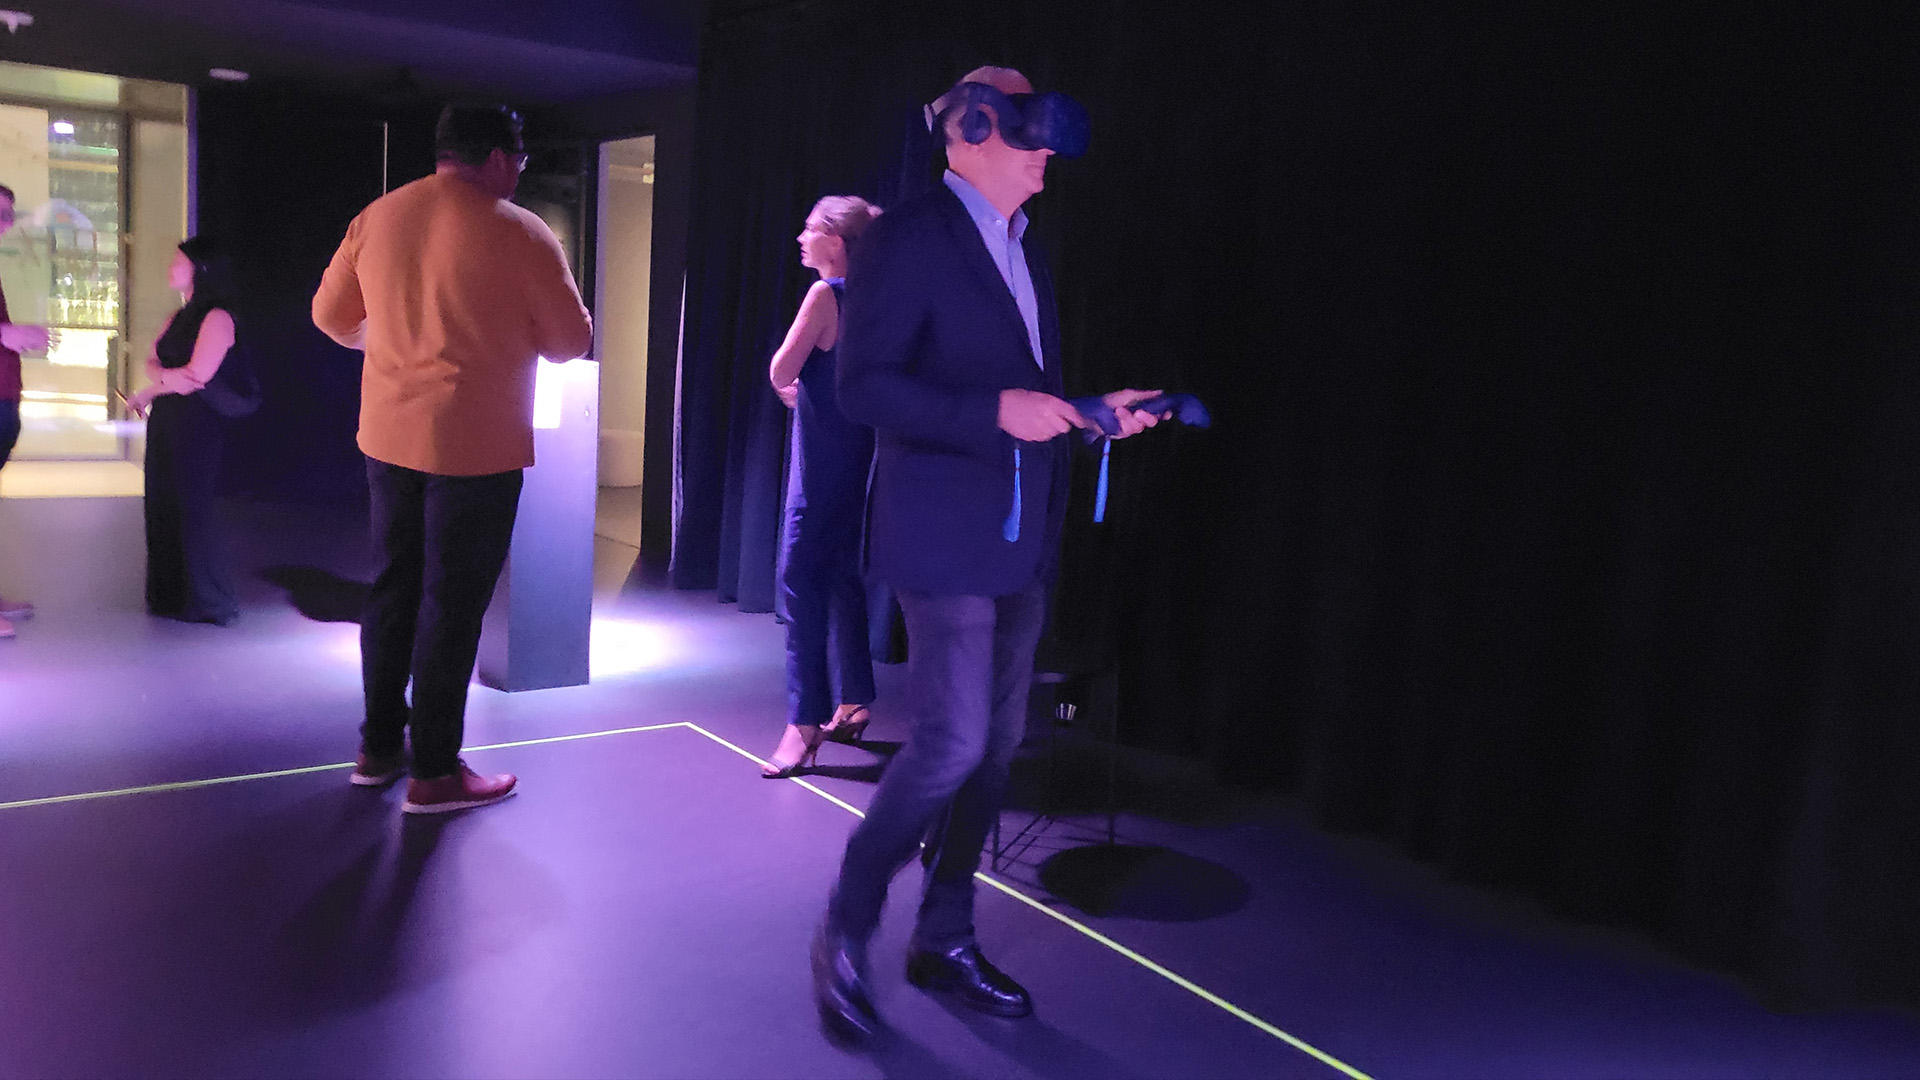 Retired NASA astronaut Mike Massimino experiences virtual reality at Ashley Zelinkskie's "Unfolding the Universe: First Light" exhibit.